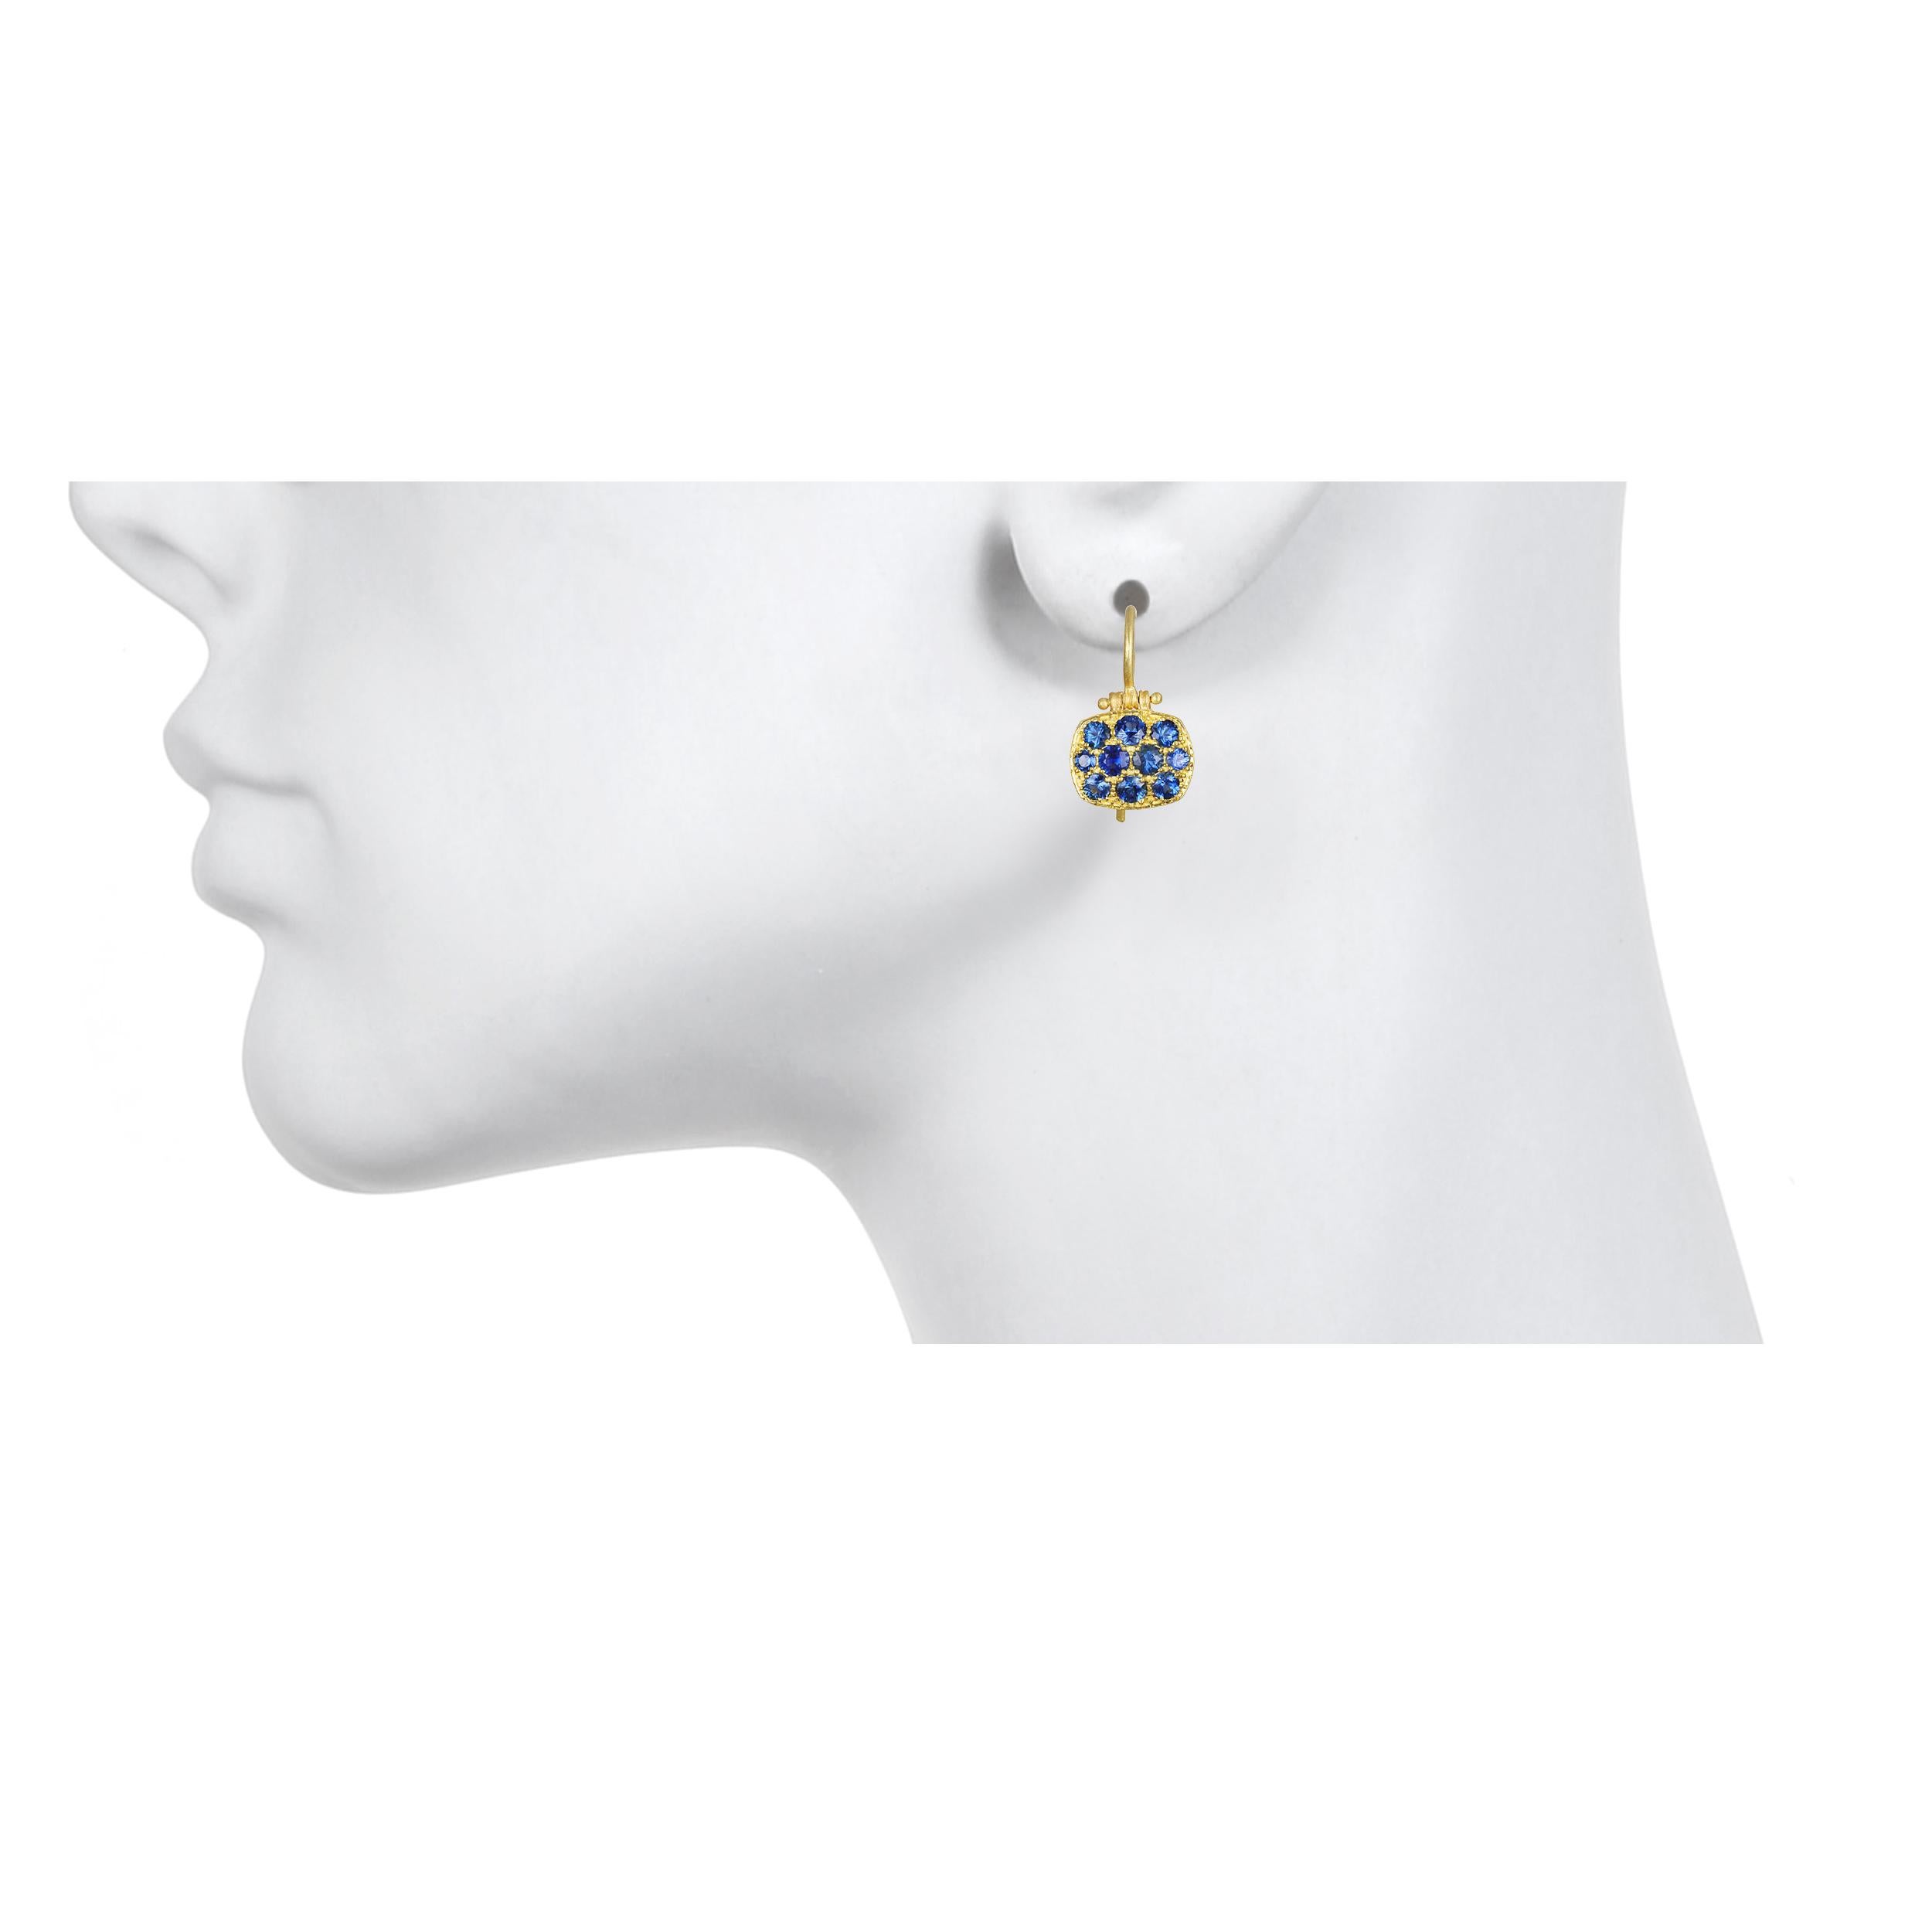 Faye Kim 18 Karat Blue Sapphire Chiclet Earrings

These bright and bold blue sapphire chiclet earrings have just enough sparkle to get noticed but with understated elegance.  Hinged for movement, uniquely shaped and light-weight make these earrings